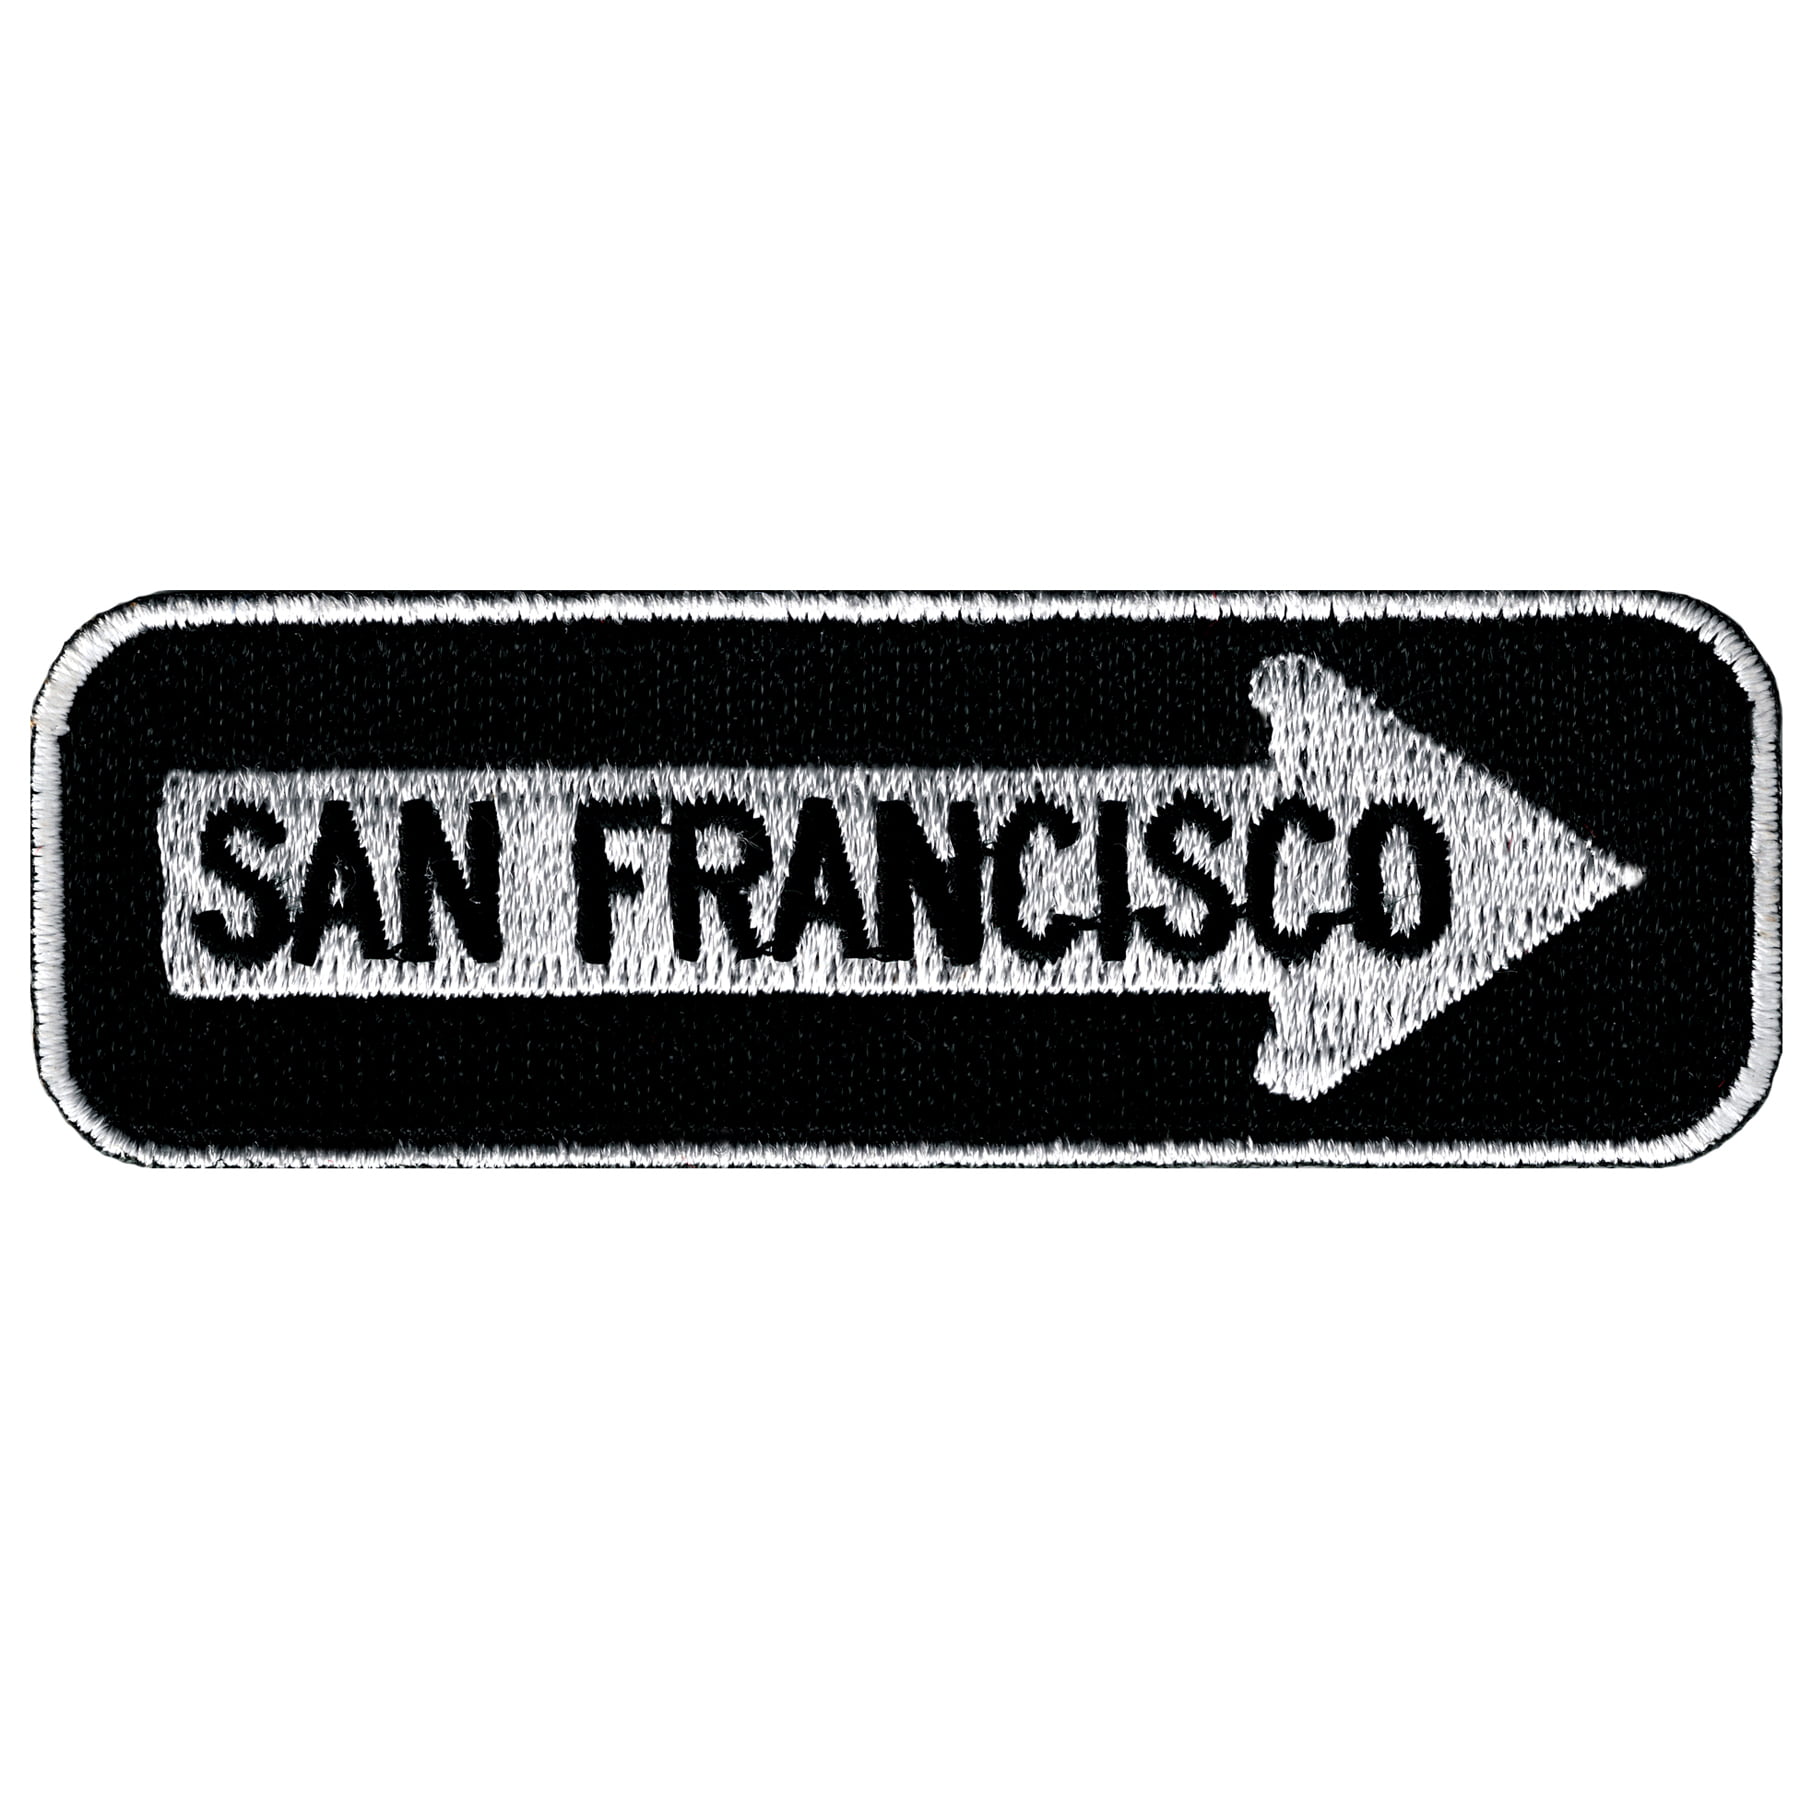 SAN FRANCISCO ONE-WAY SIGN EMBROIDERED IRON-ON PATCH emblem CALIFORNIA SOUVENIR 